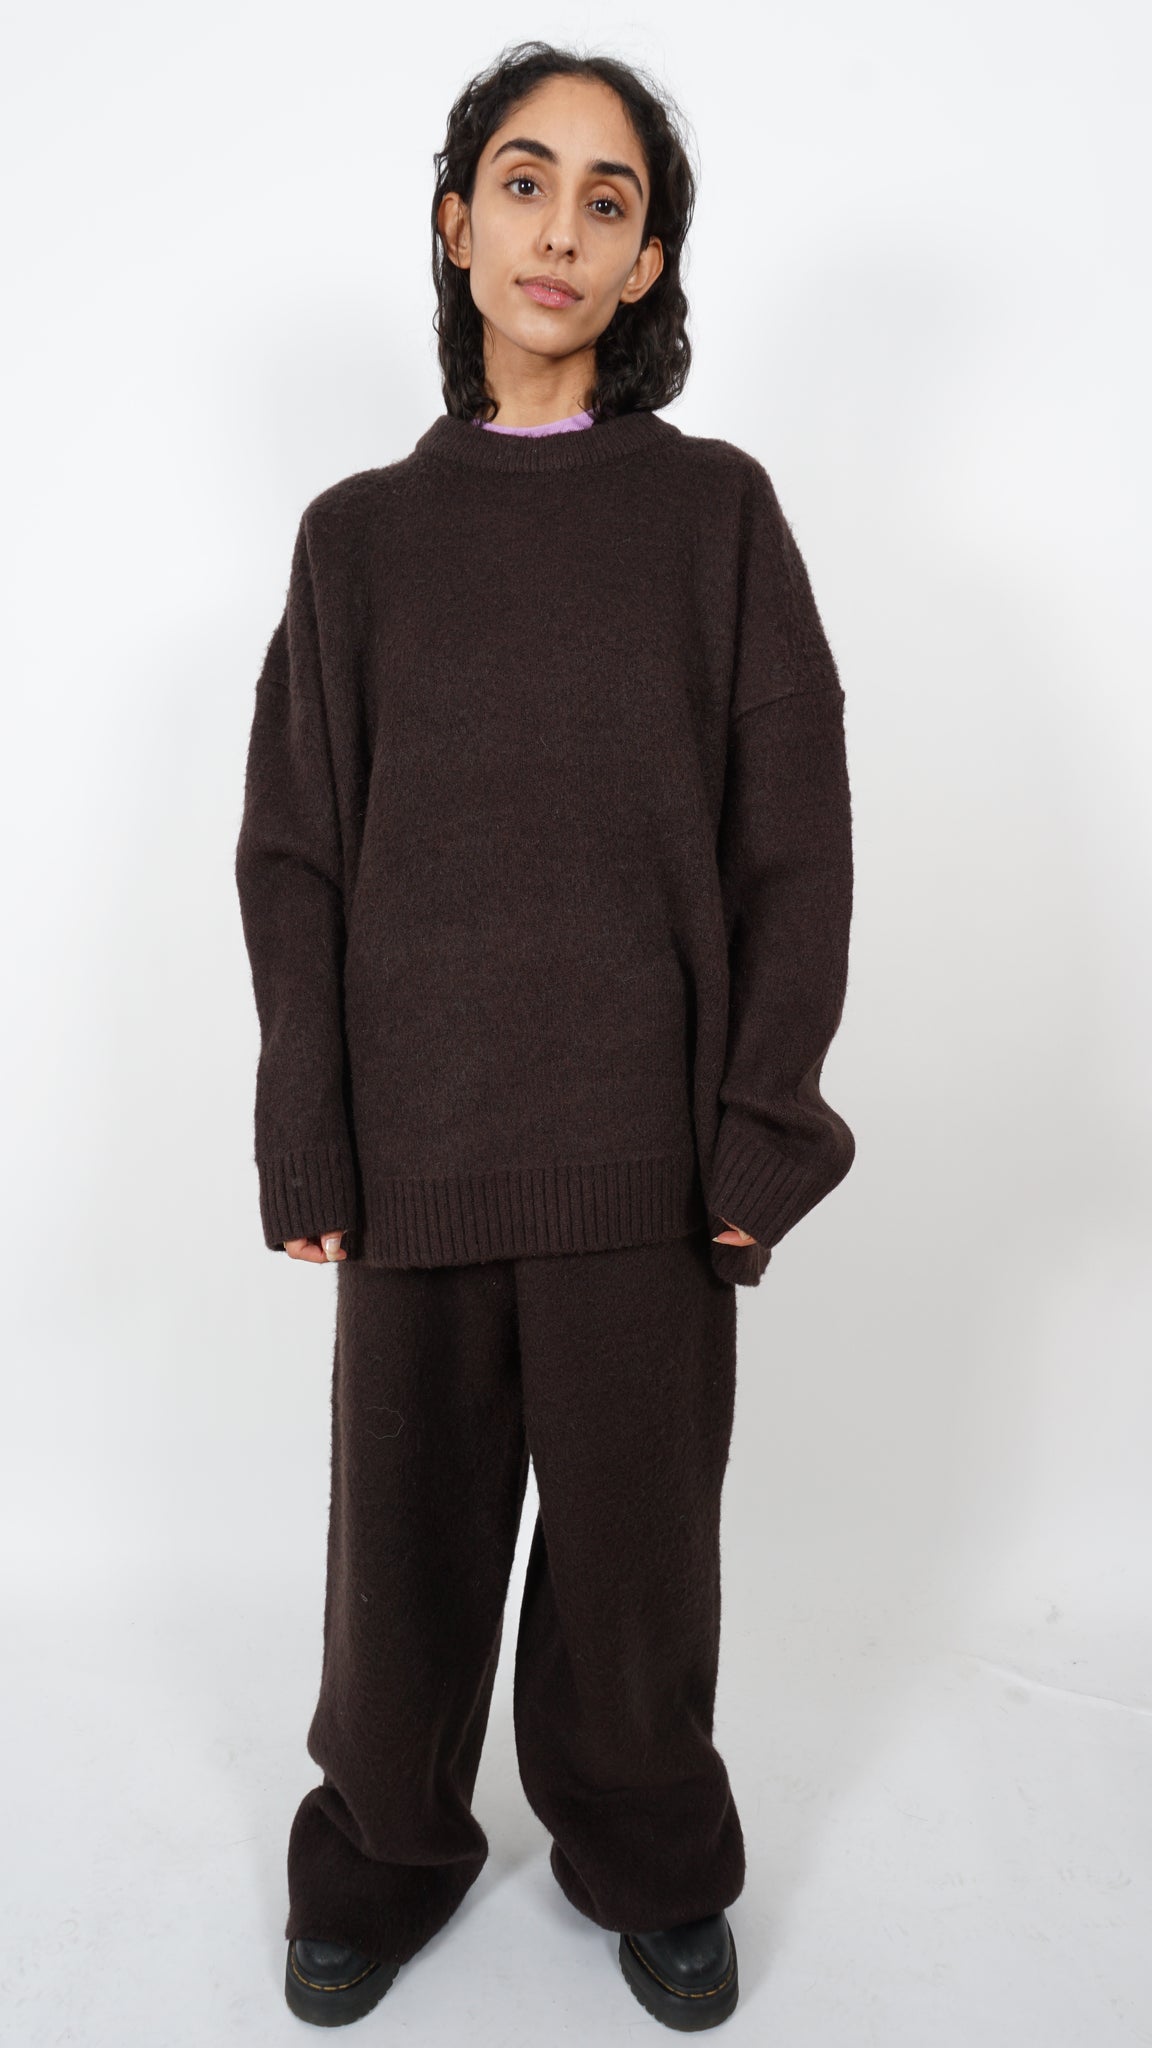 Brushed knit trouser by Birrot